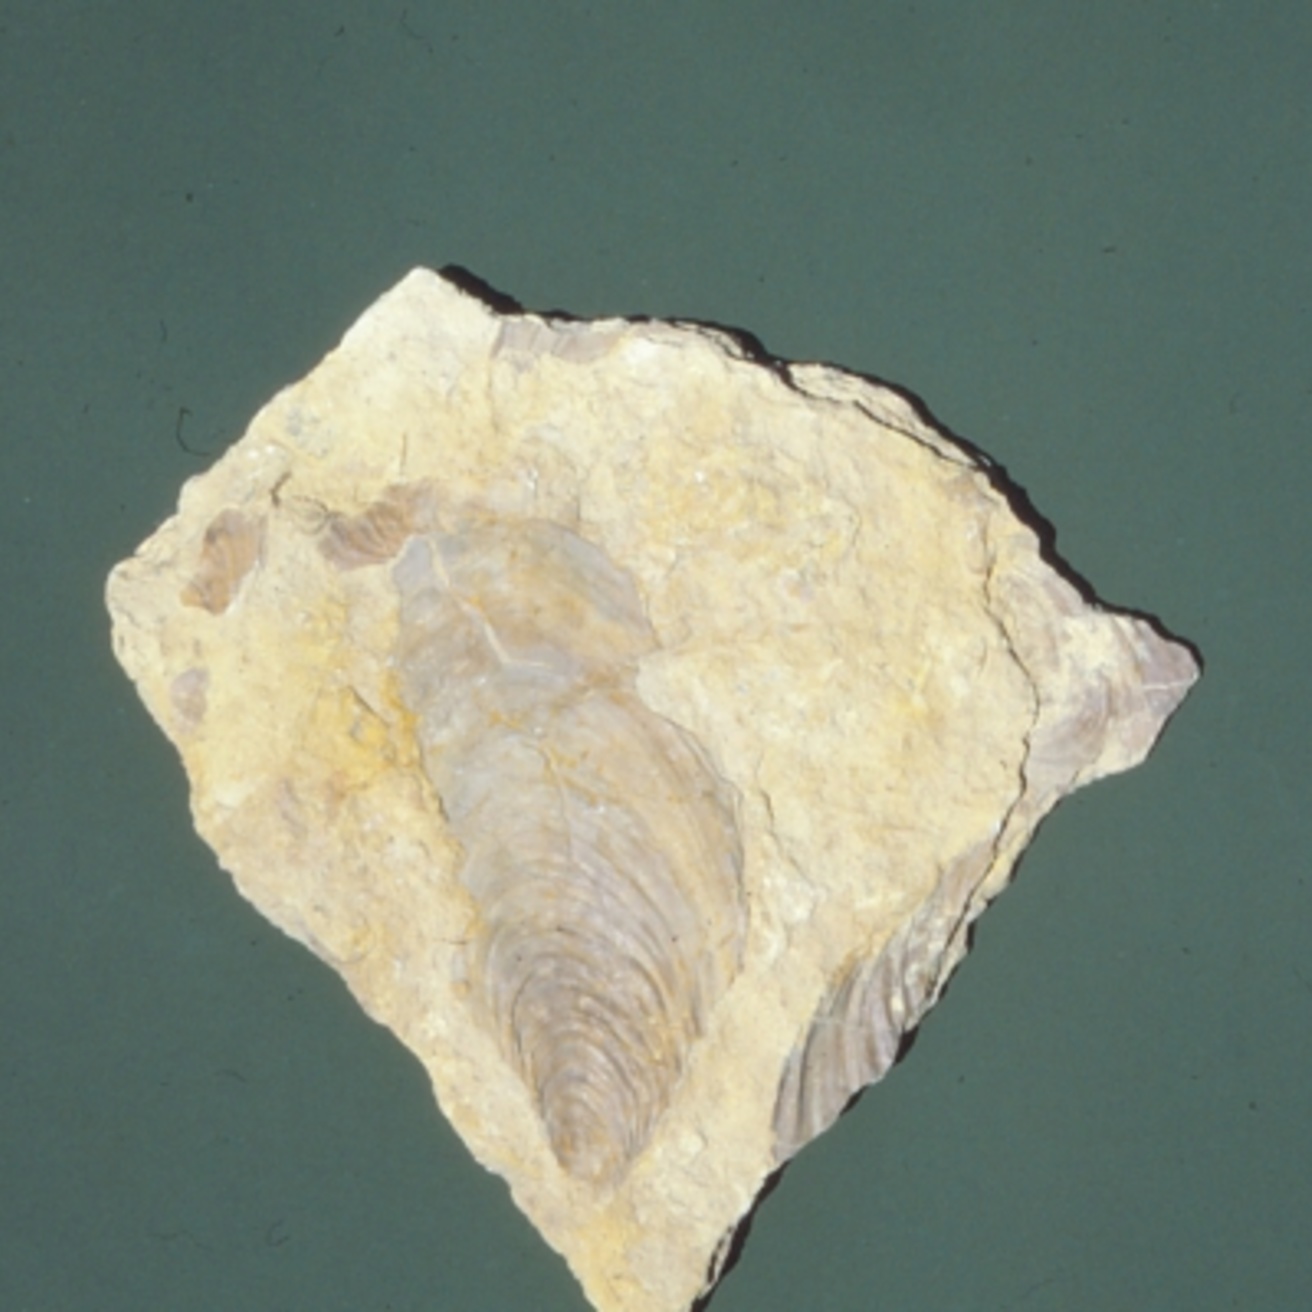 Photo of fossilized clam shell